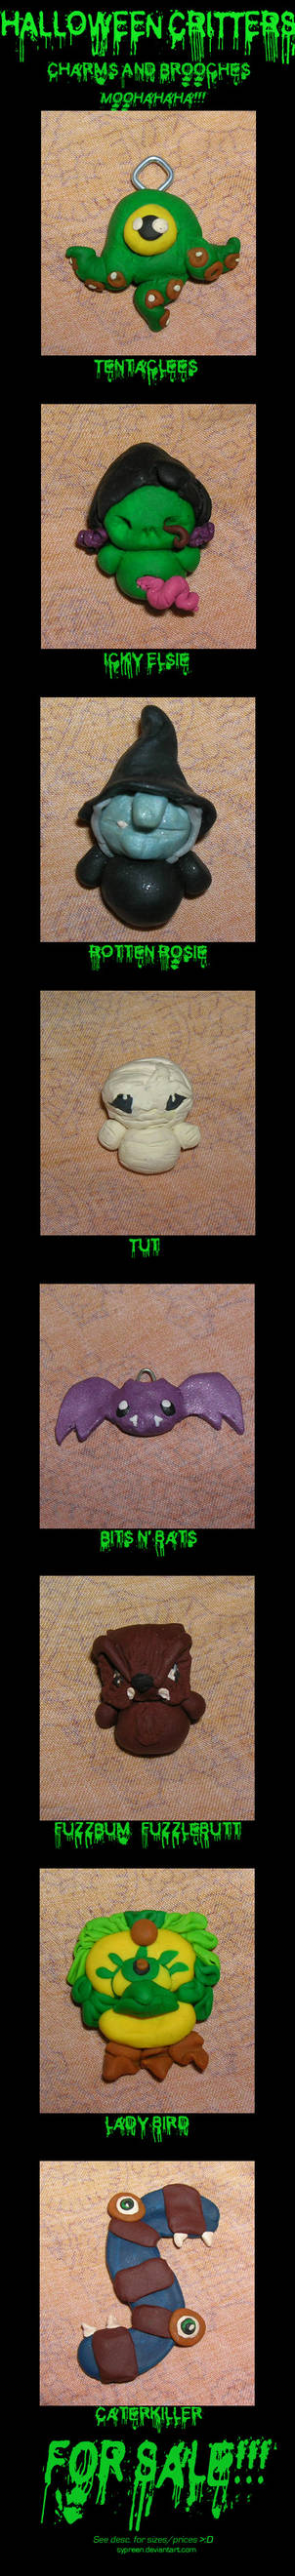 Halloween Charms and Brooches